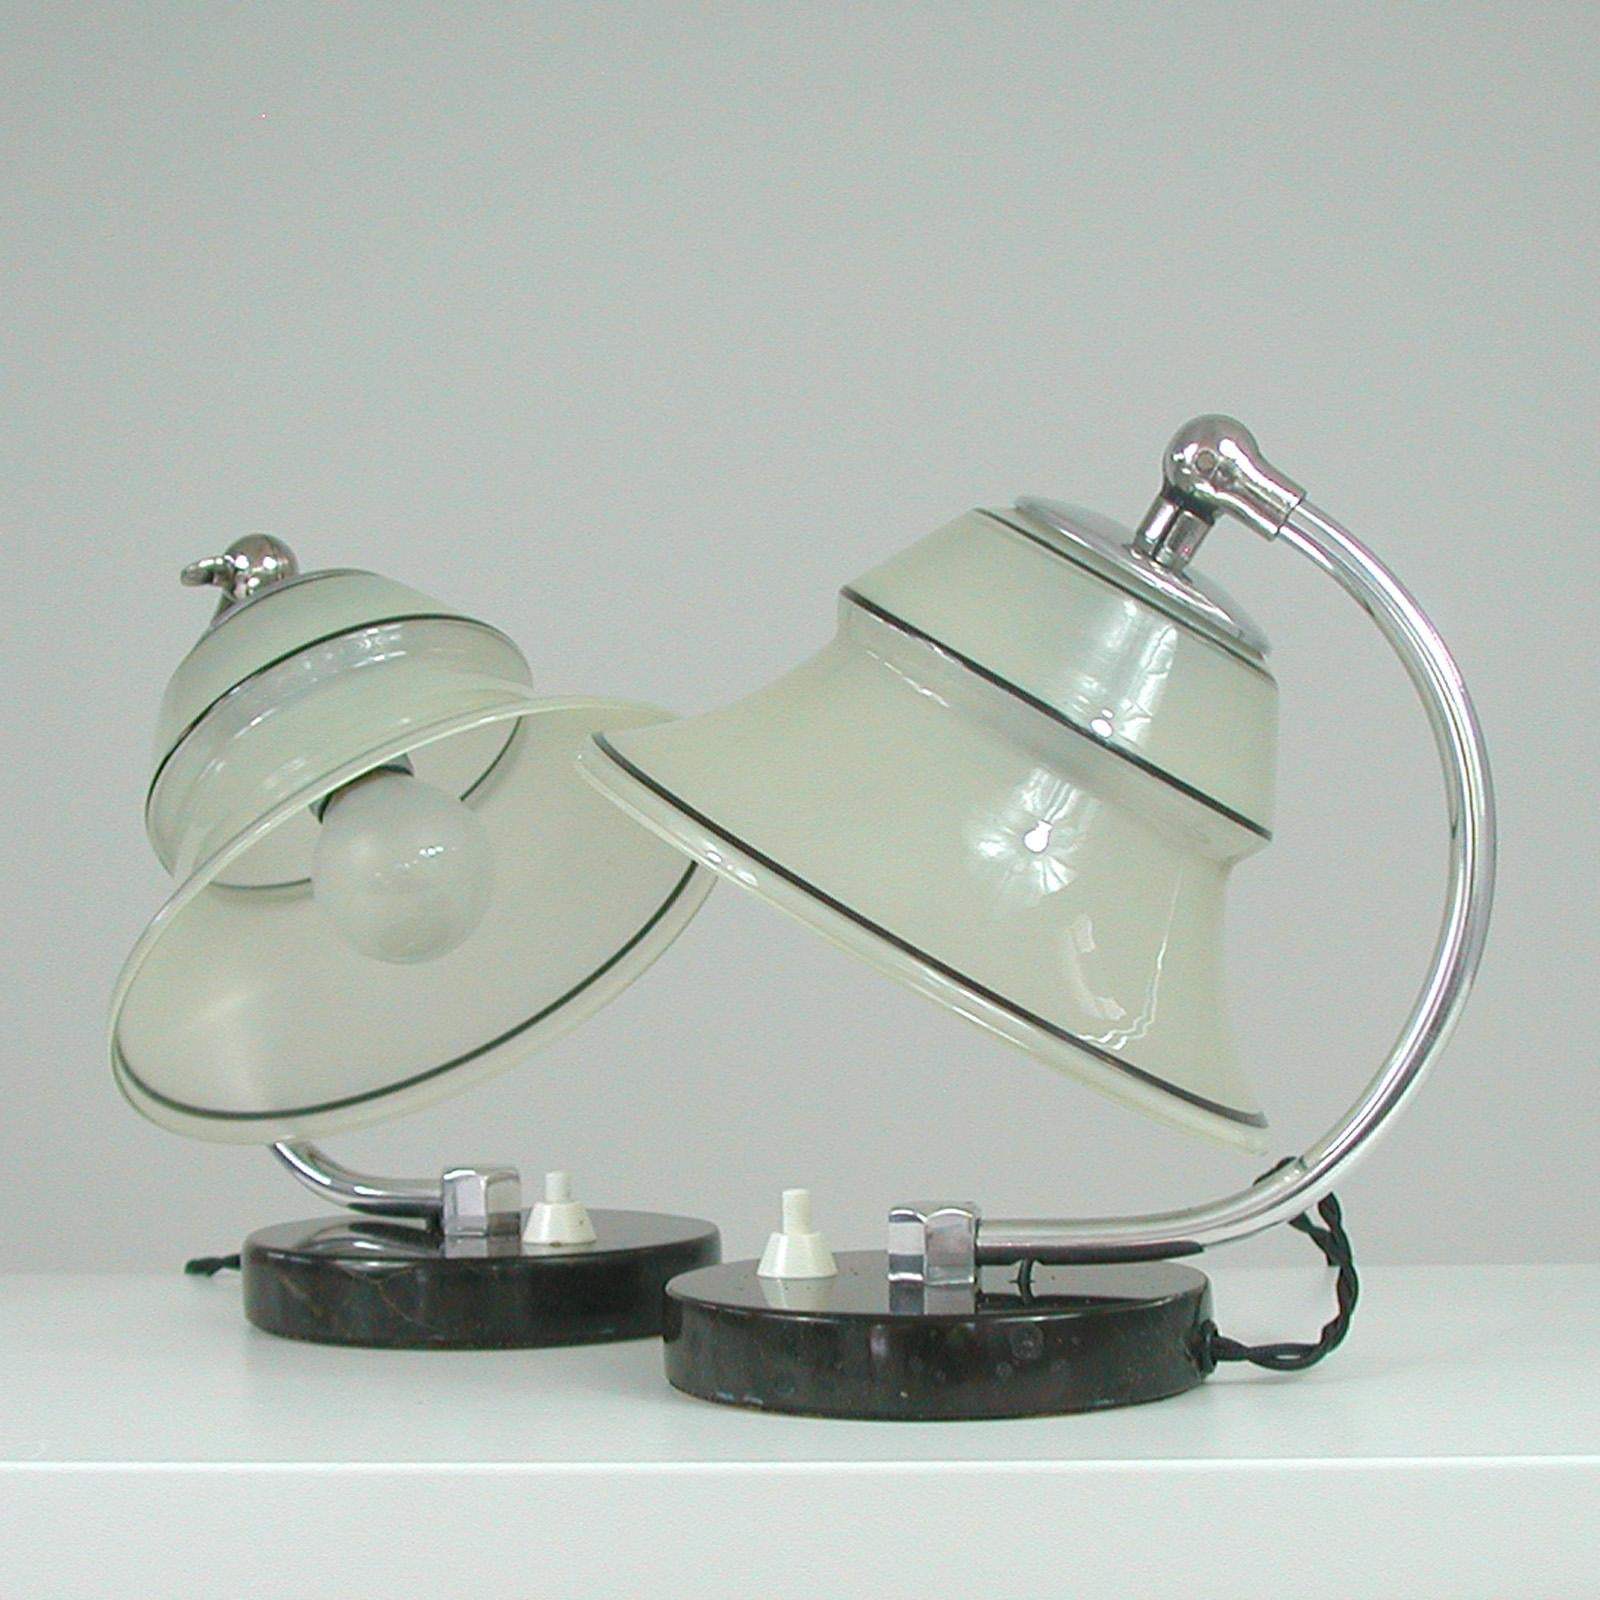 German Art Deco Enameled Satin Glass, Marble and Aluminum Table Lamps, 1930s For Sale 4